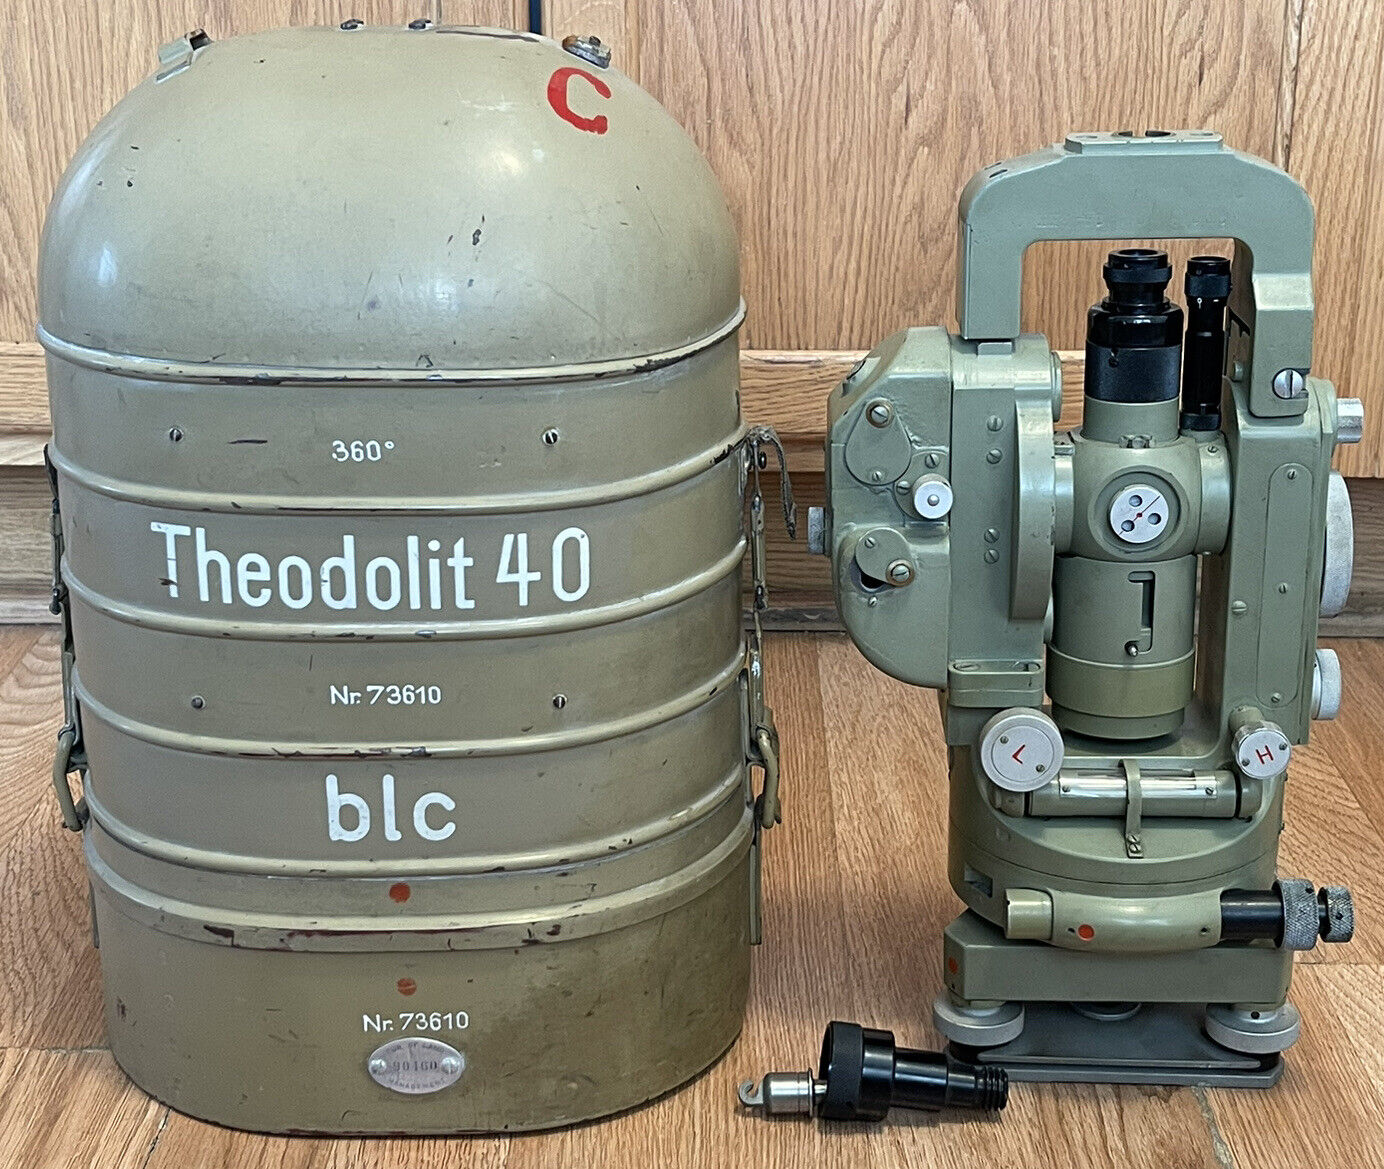 WWII Vintage German Theodolite Zeiss TH 40 BLC 360 Directional Surveying